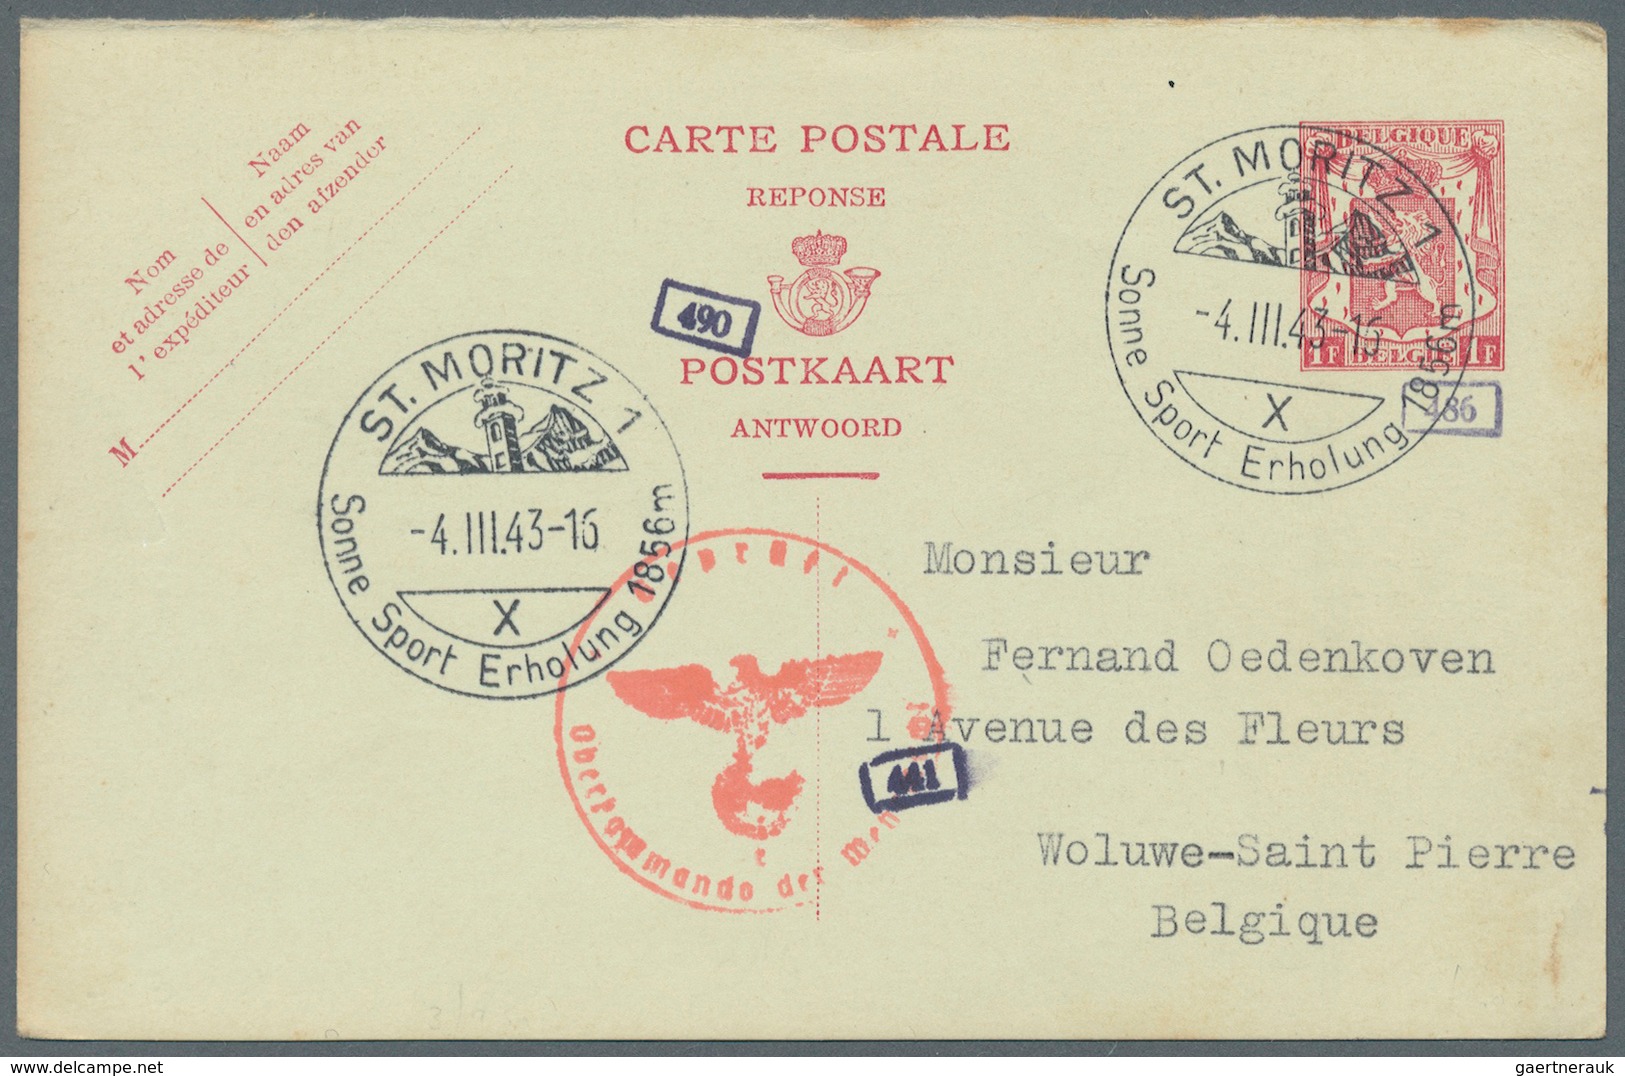 28847 BENELUX: 1823/1943, group of seven better entires, e.g. four Belgien reply cards returned from Switz